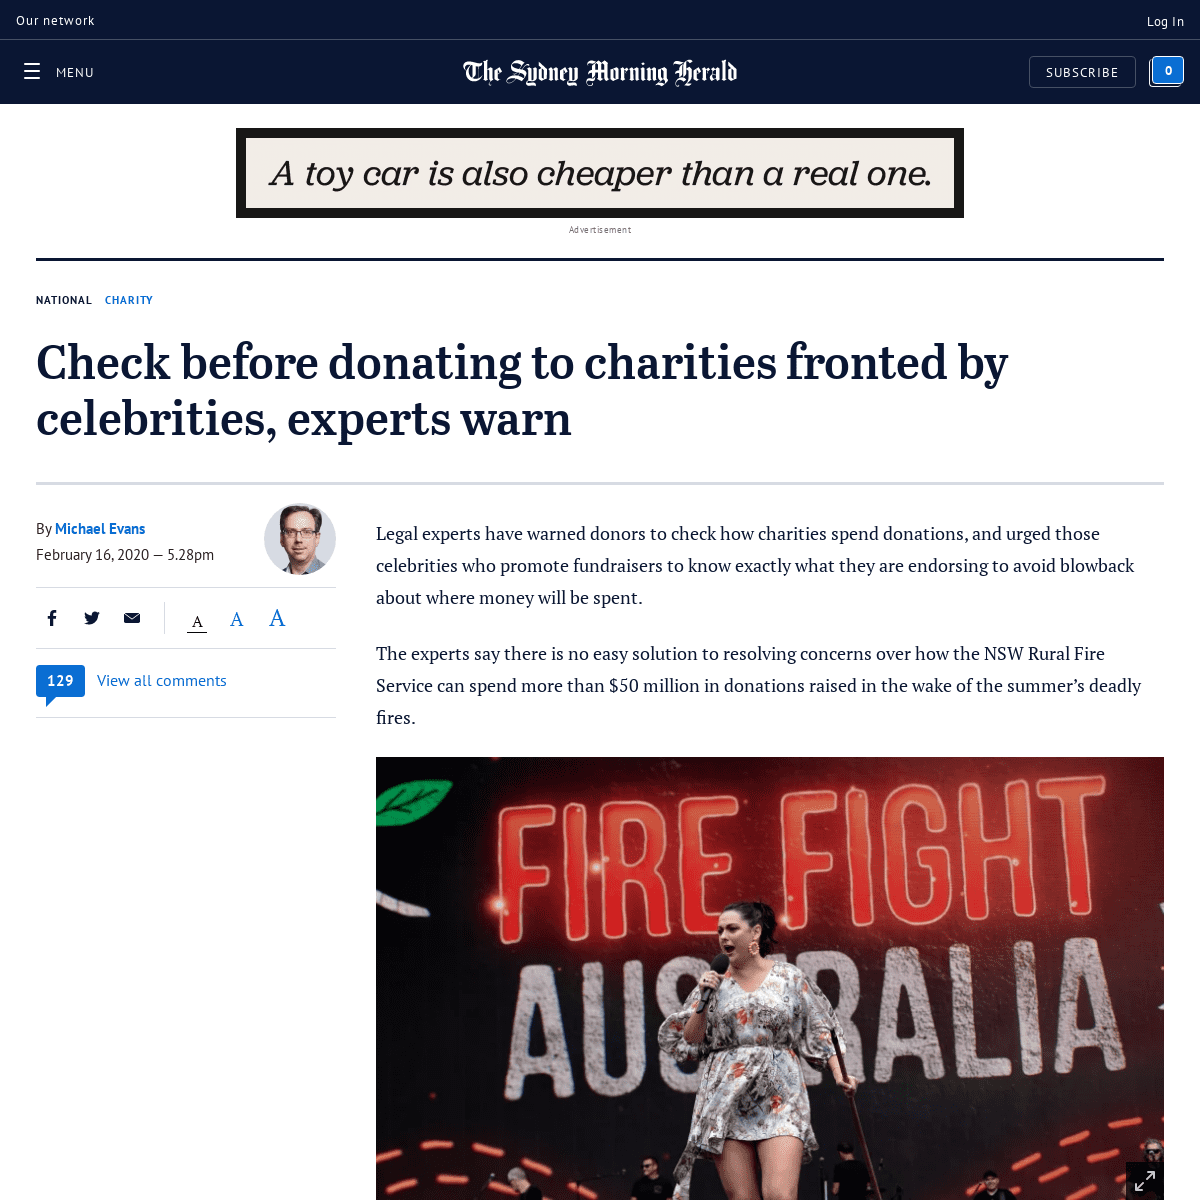 A complete backup of www.smh.com.au/national/check-before-donating-to-charities-fronted-by-celebrities-experts-warn-20200216-p54